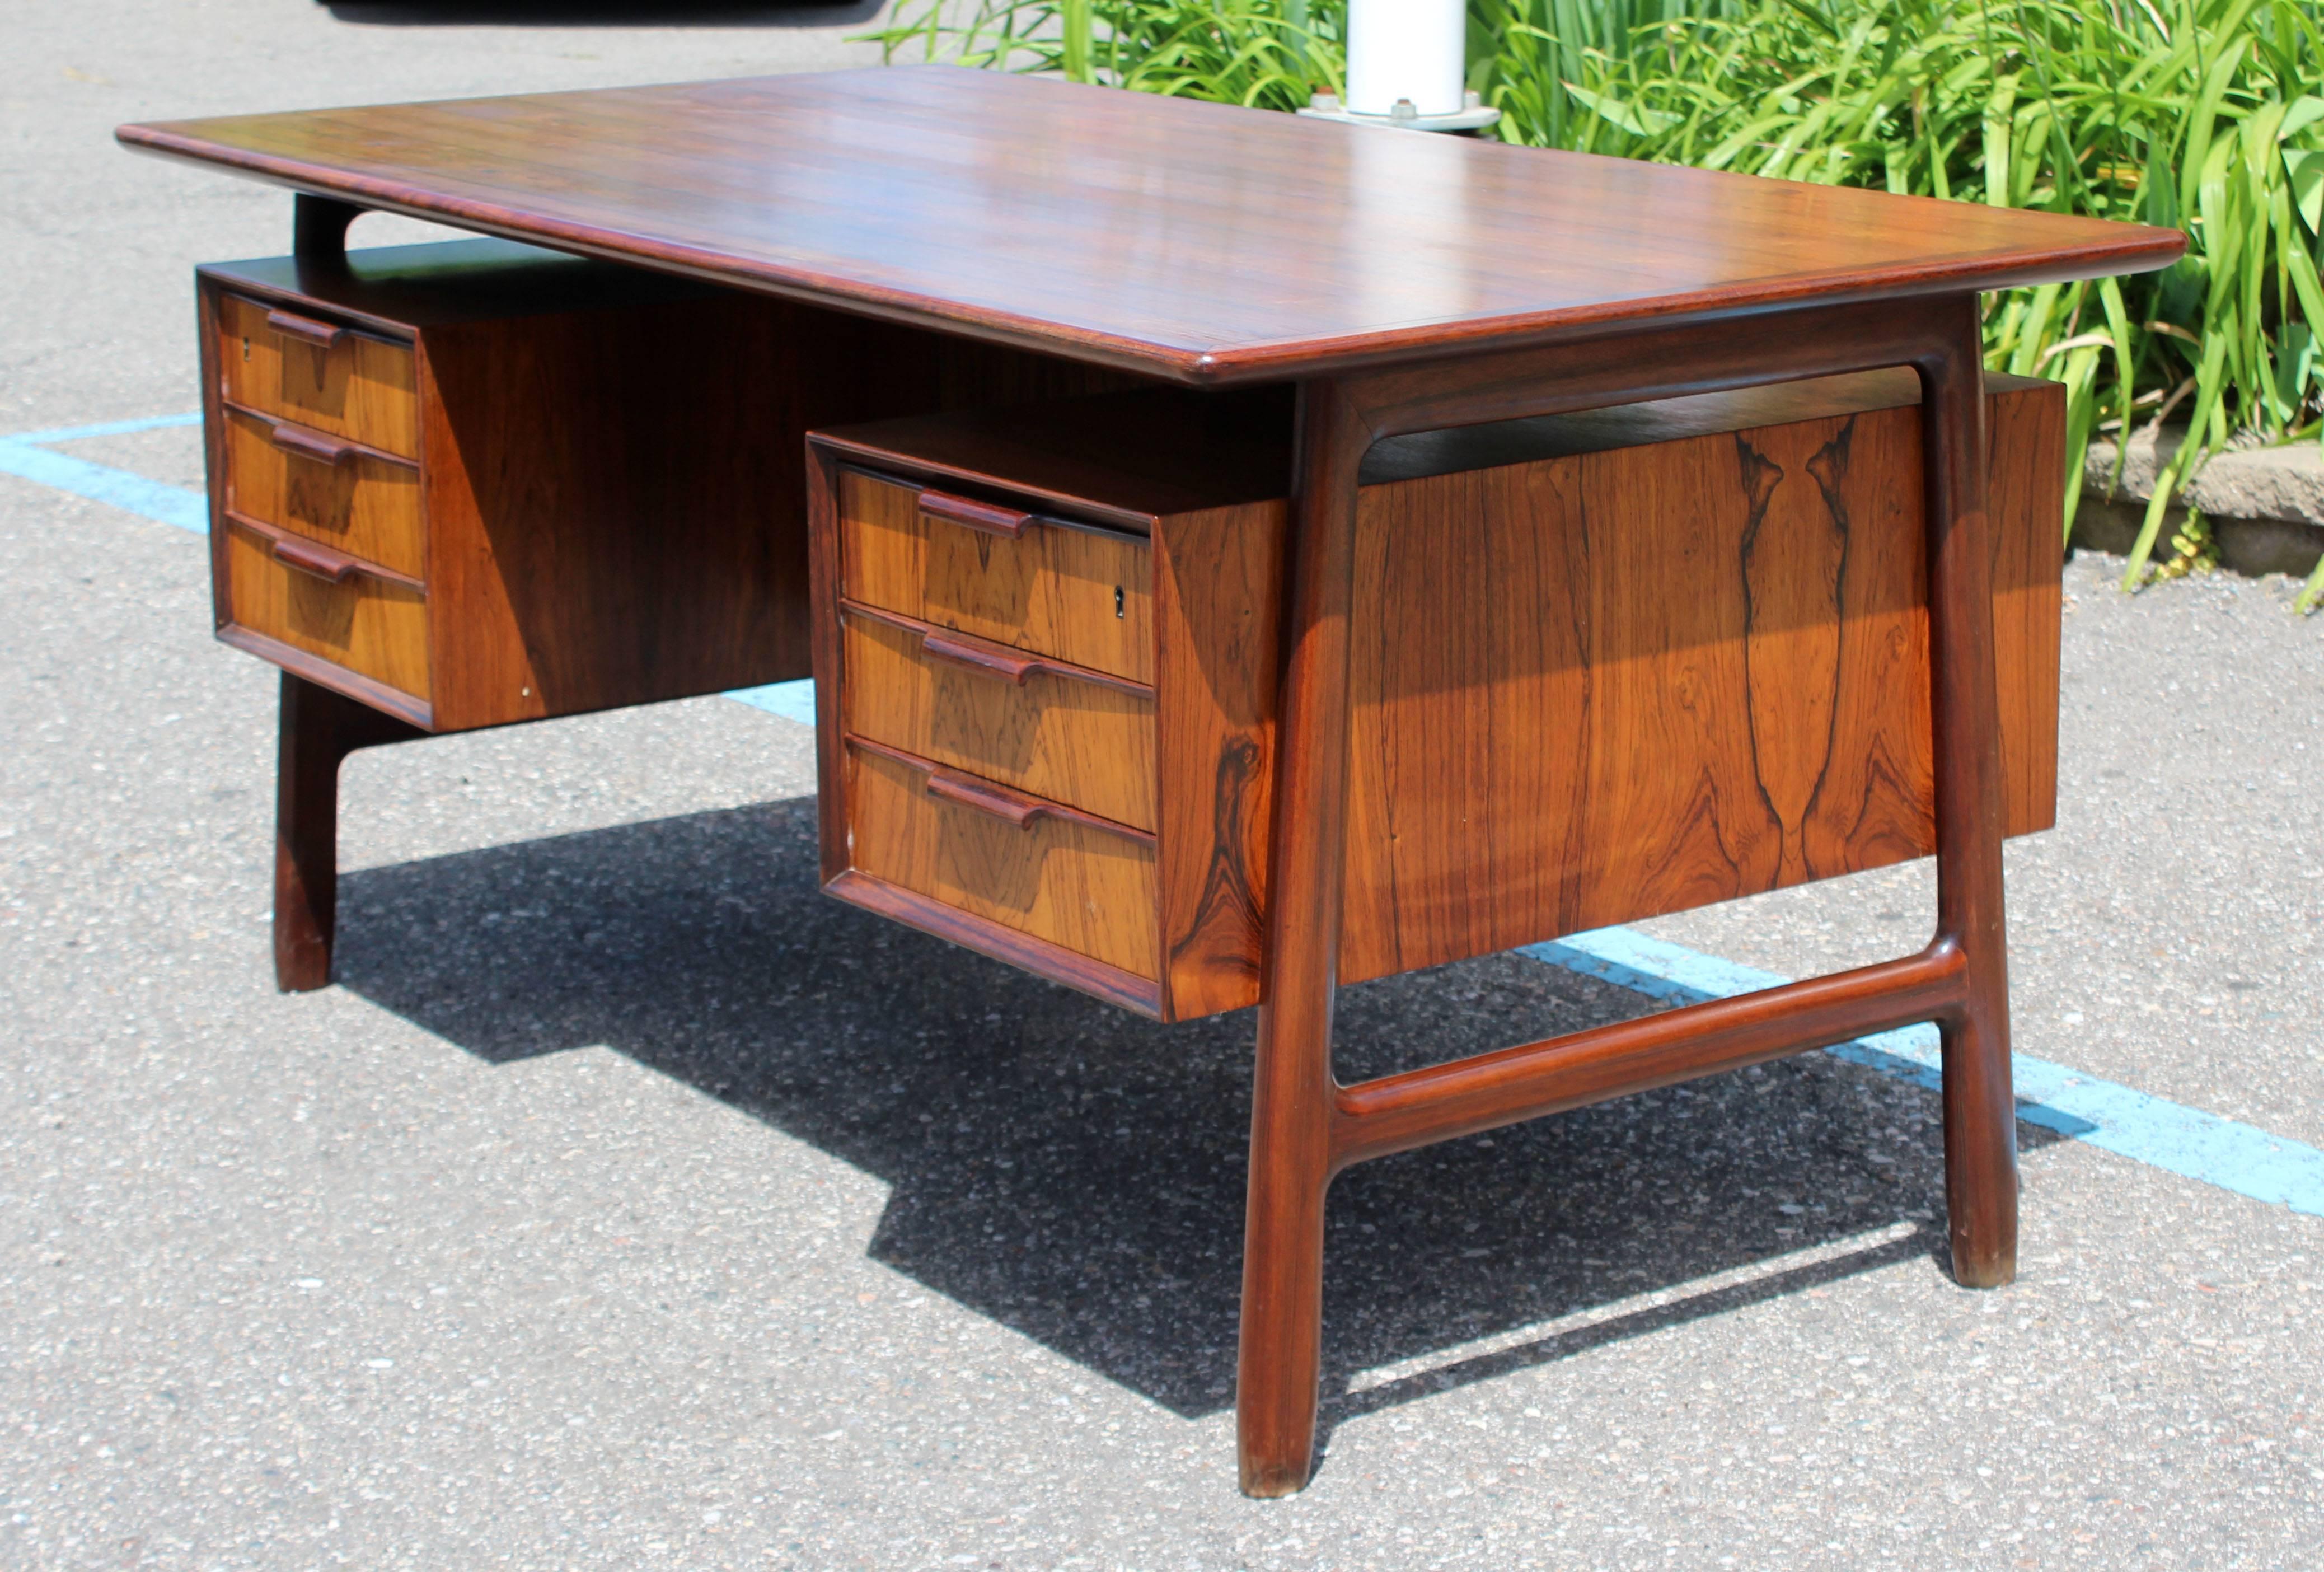 For your consideration is a fabulous, six-drawer, floating top rosewood desk from Denmark, by Gunni Omann in the 1960s. In excellent condition. The dimensions are 55